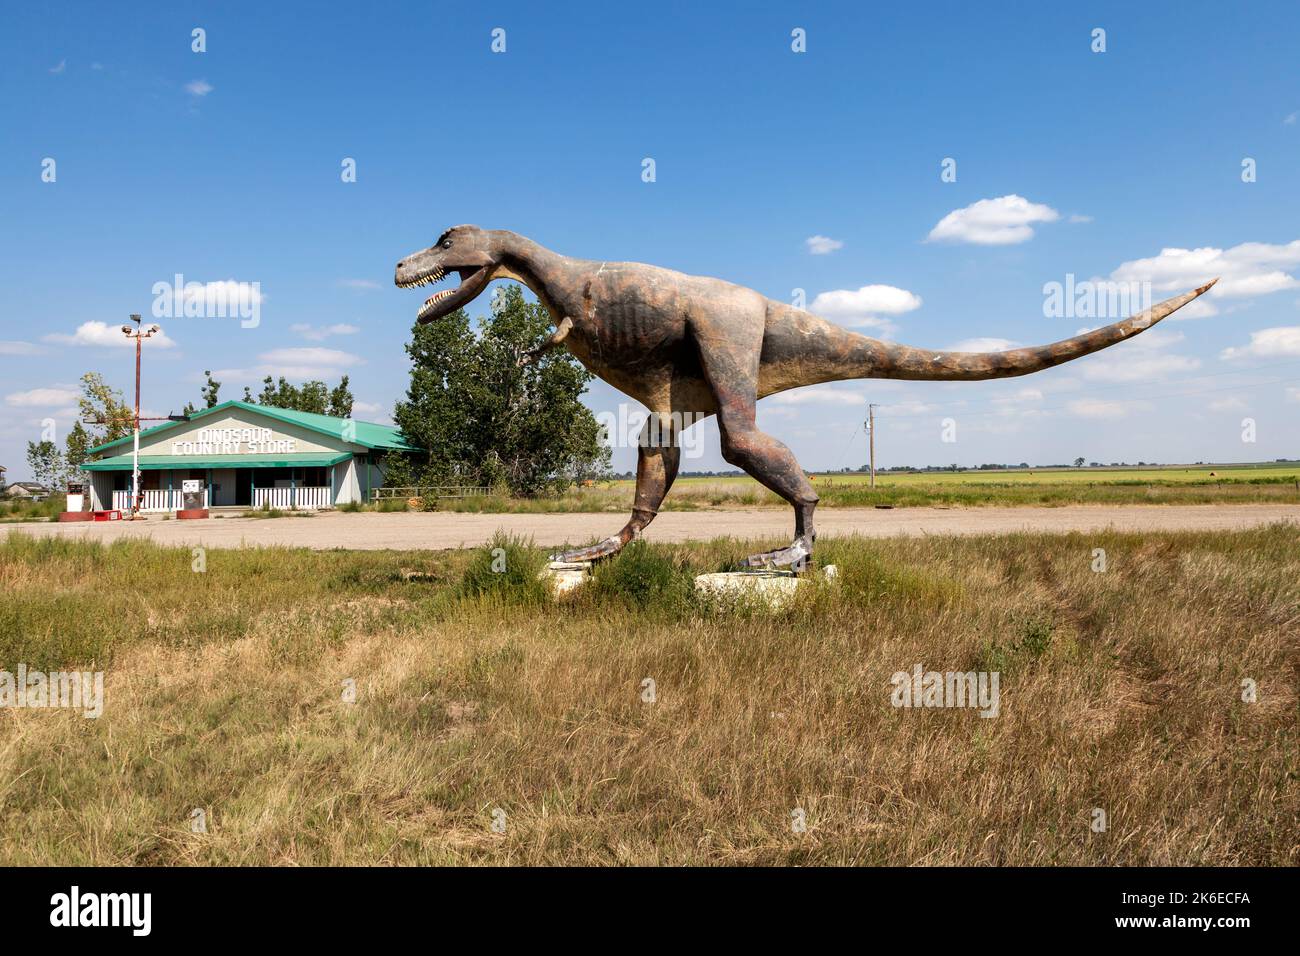 Albertosaurus makes a stop for some snacks at the Dinosaur Country Store in Brooks, Alberta. The Albertosaurus, (genus Albertosaurus), usually subsume Stock Photo